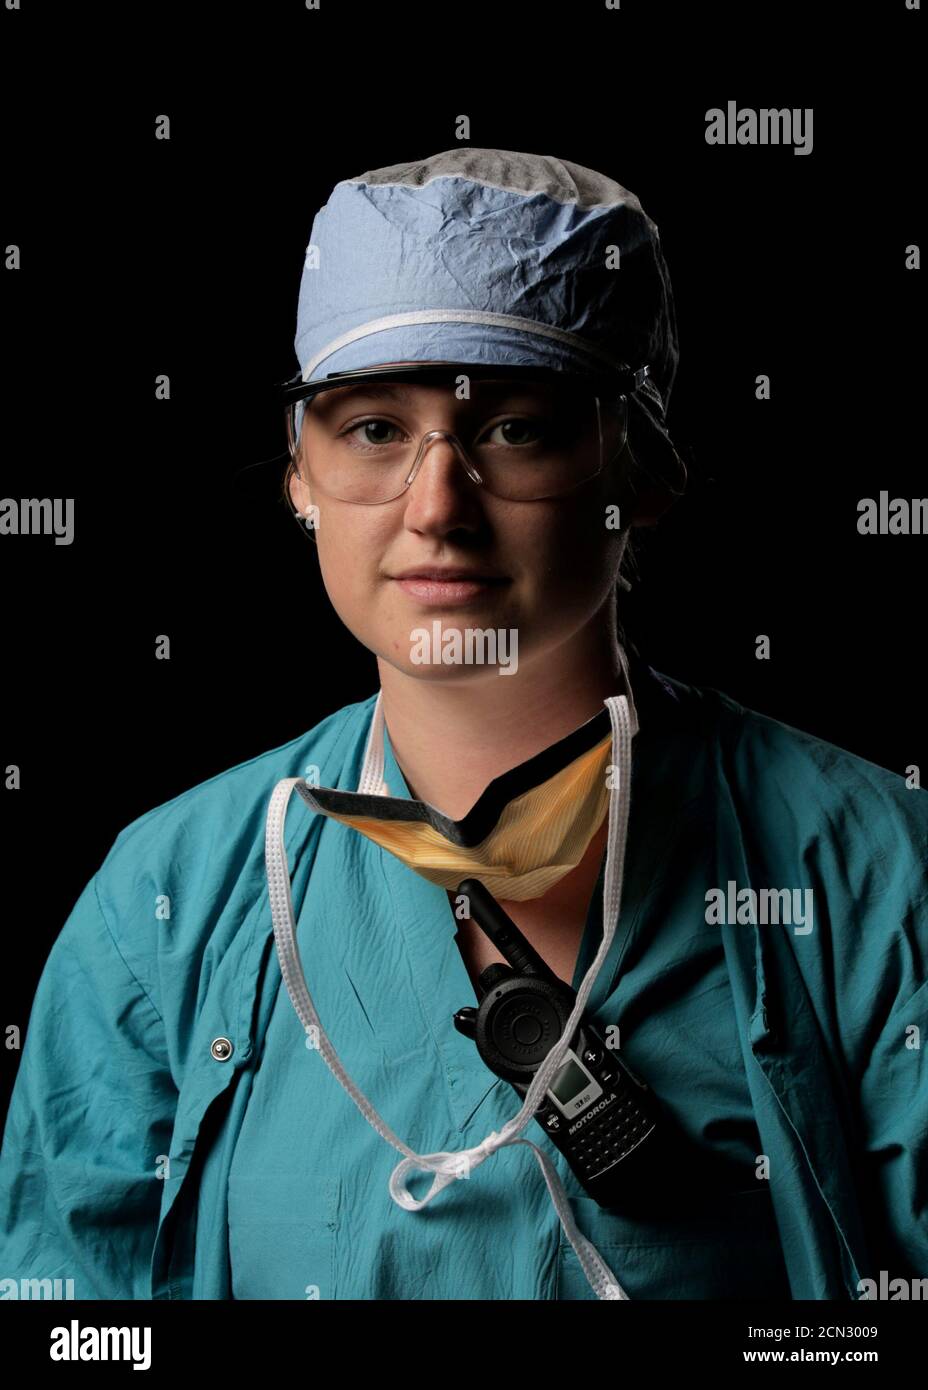 Hannah Hausman, a nurse in the emergency department that works on a team of COVID-19 nurses to plan for employee safety and a surge plan for increased COVID-19 patients, poses for a portrait at the Swedish Medical Center First Hill campus during the coronavirus disease (COVID-19) outbreak, in Seattle, Washington, U.S. April 20, 2020. 'Even though this time is stressful, I have become more thankful for my team and how we have come together and supported each other,' she says.  REUTERS/David Ryder Stock Photo